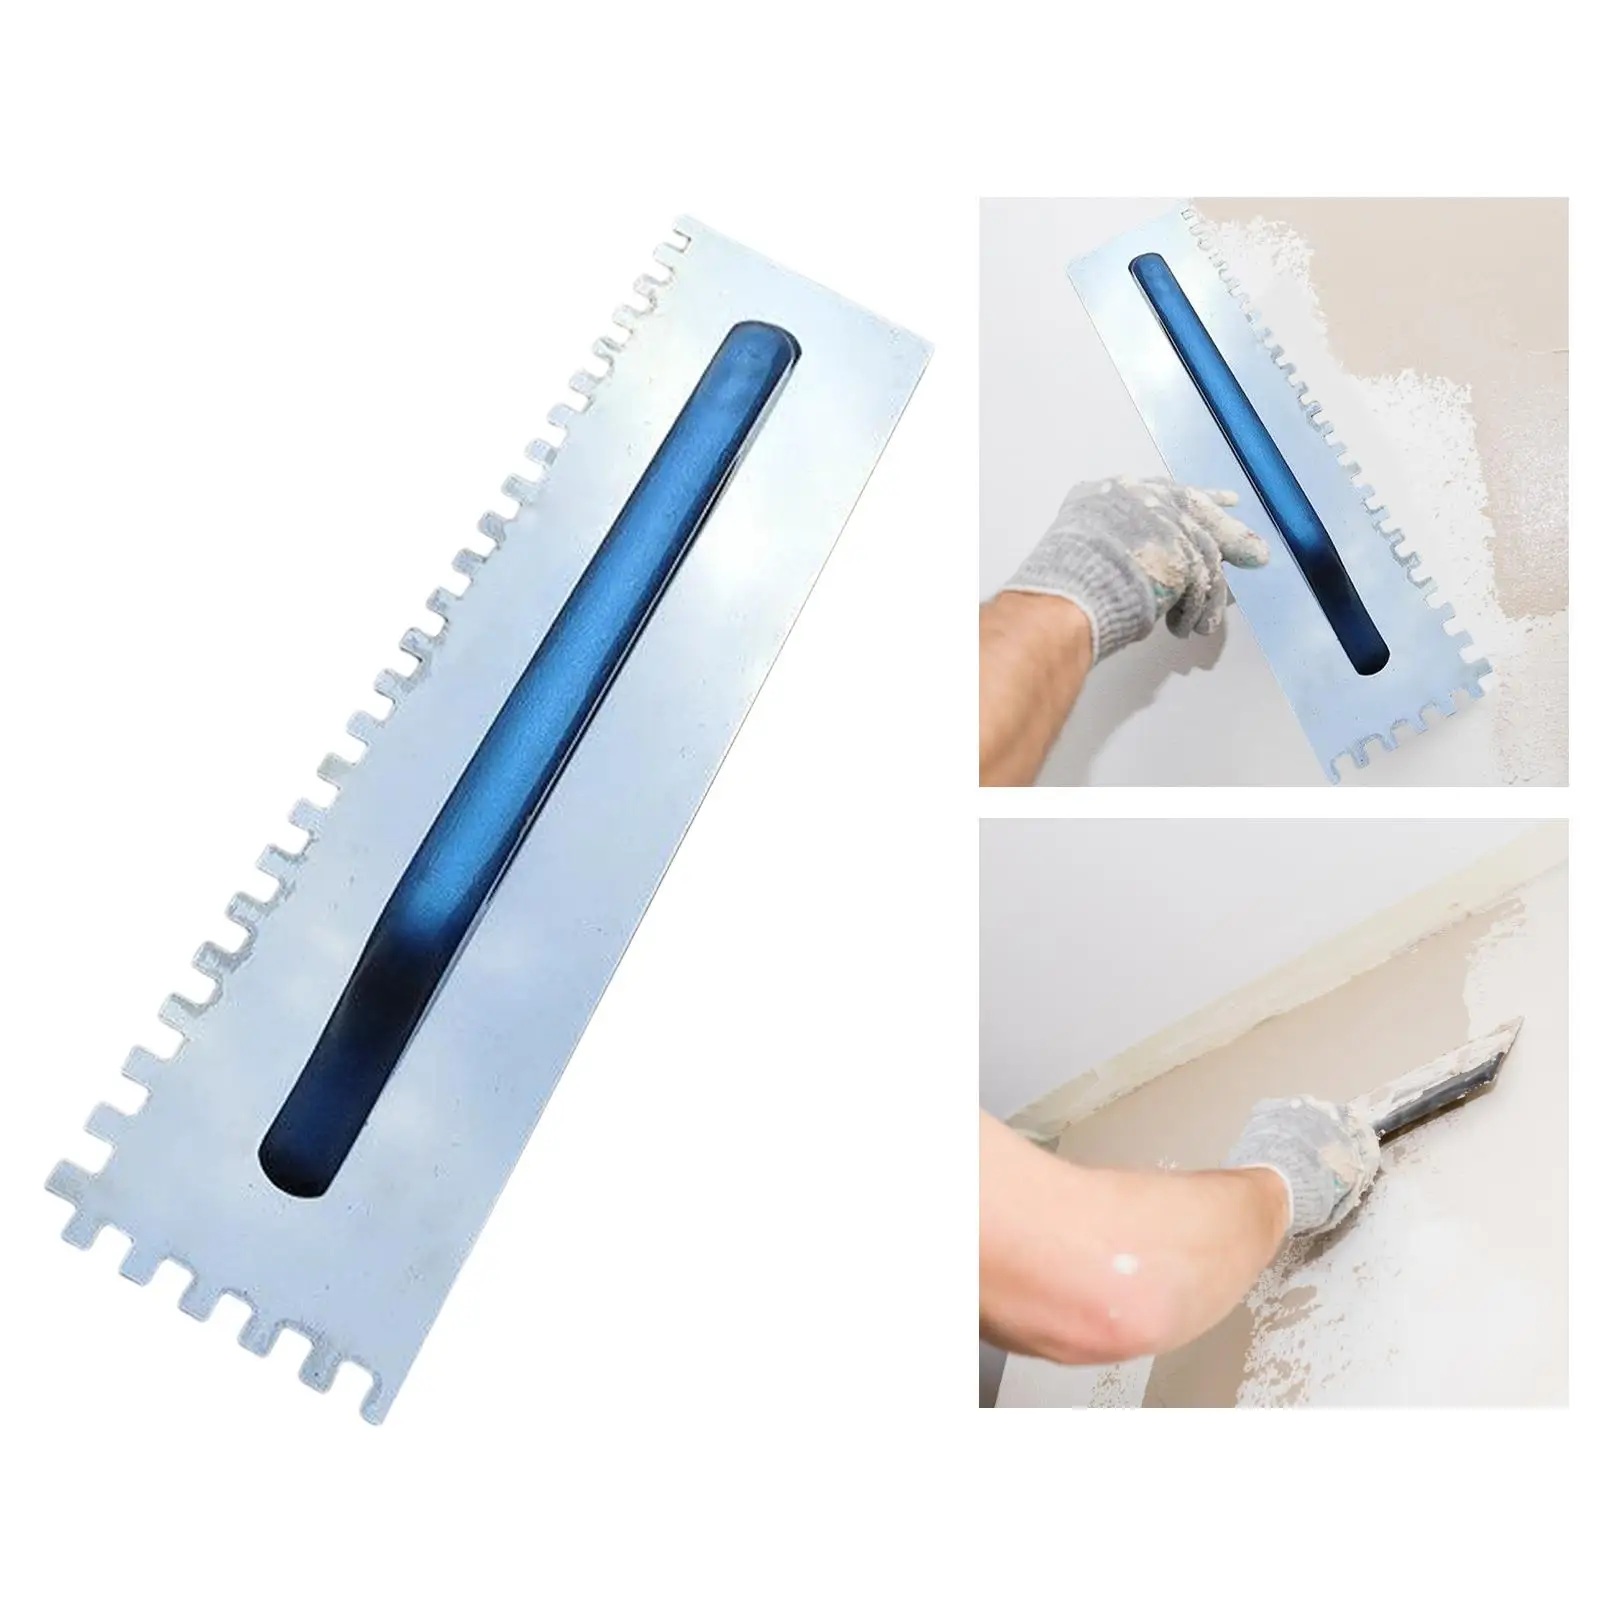 Drywall Smoothing Spatula Construction Tool Plaster Trowel Concrete Scraping Tool Wall Plastering Mud Floor Wall Tile Painting